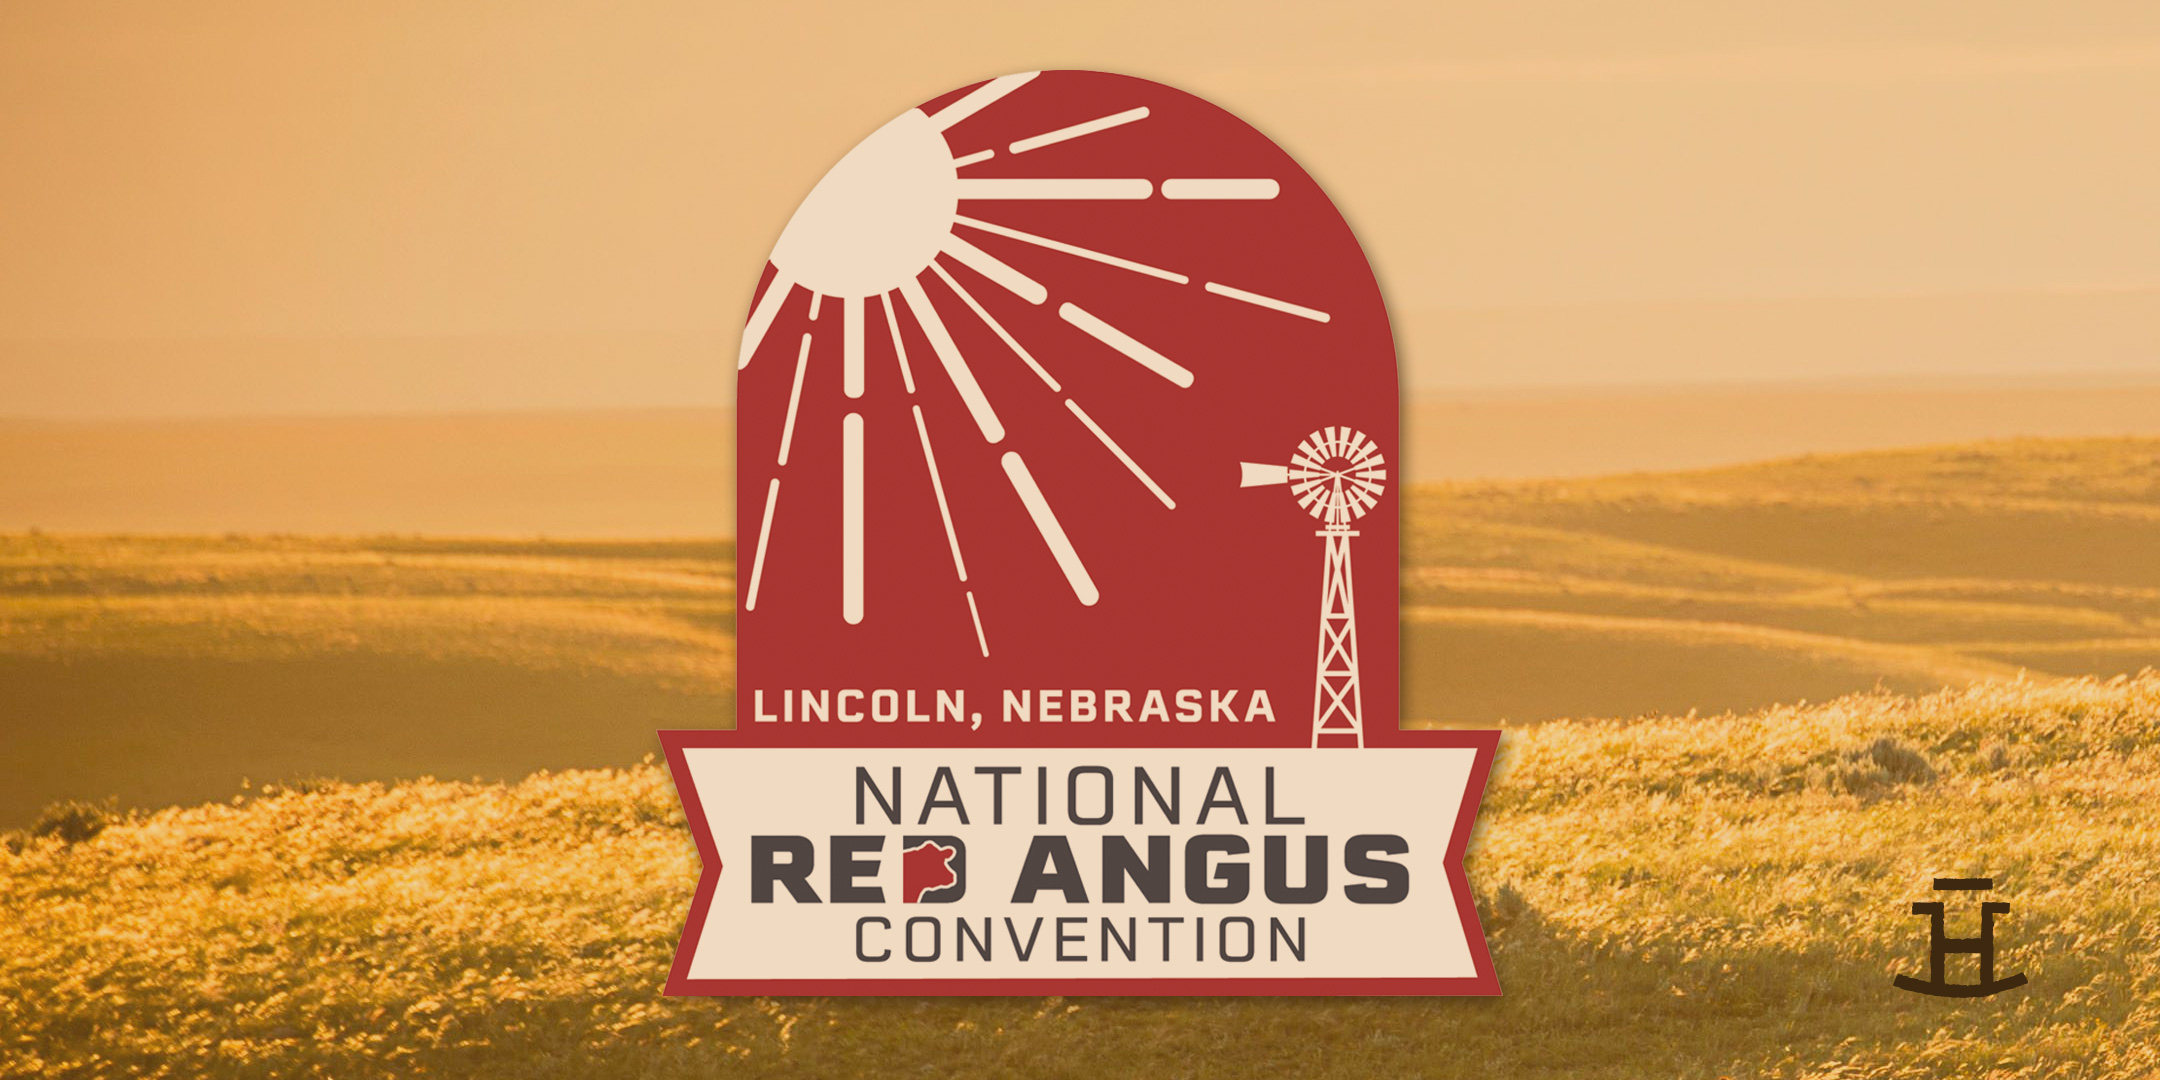 National Red Angus Convention, Lincoln Nebraska